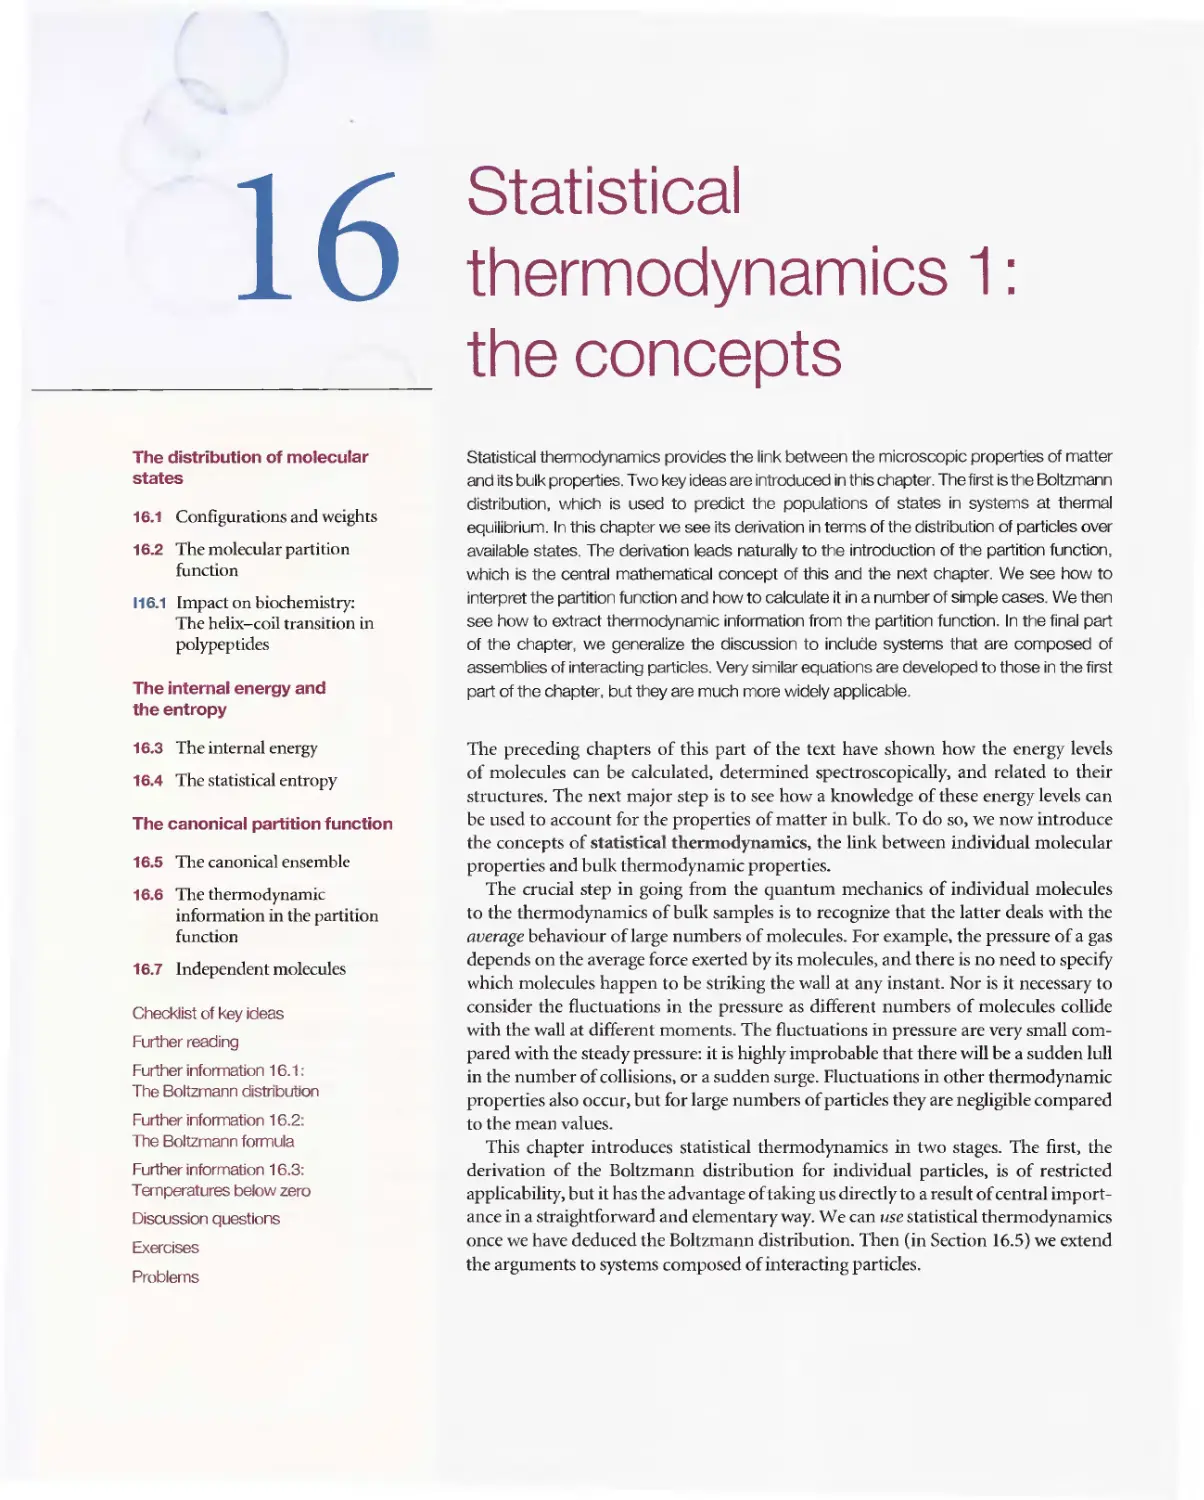 16 - Statistical thermodynamics 1 - The concepts